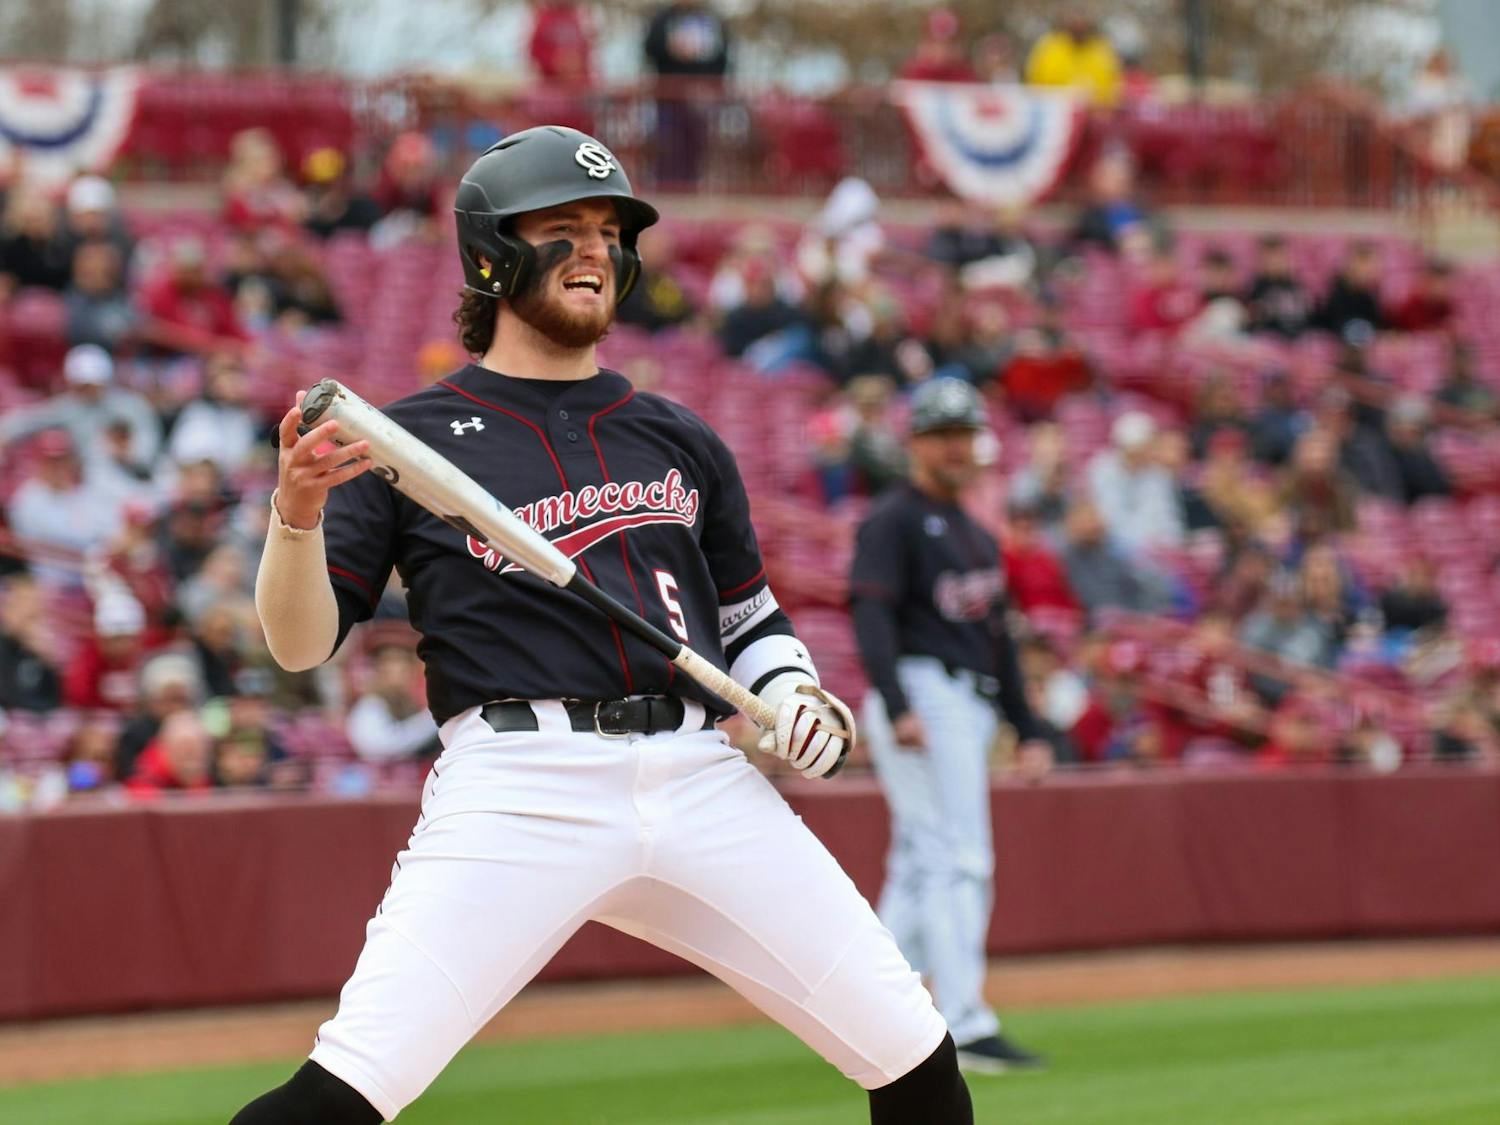 Junior infielder, catcher Talmadge LeCroy exclaims in frustration at an umpire's call during the Gamecock's game against the RedHawks on Feb. 18, 2024. LeCroy had 3 runs that helped contribute to South Carolina's 14-0 win against Miami-Ohio.